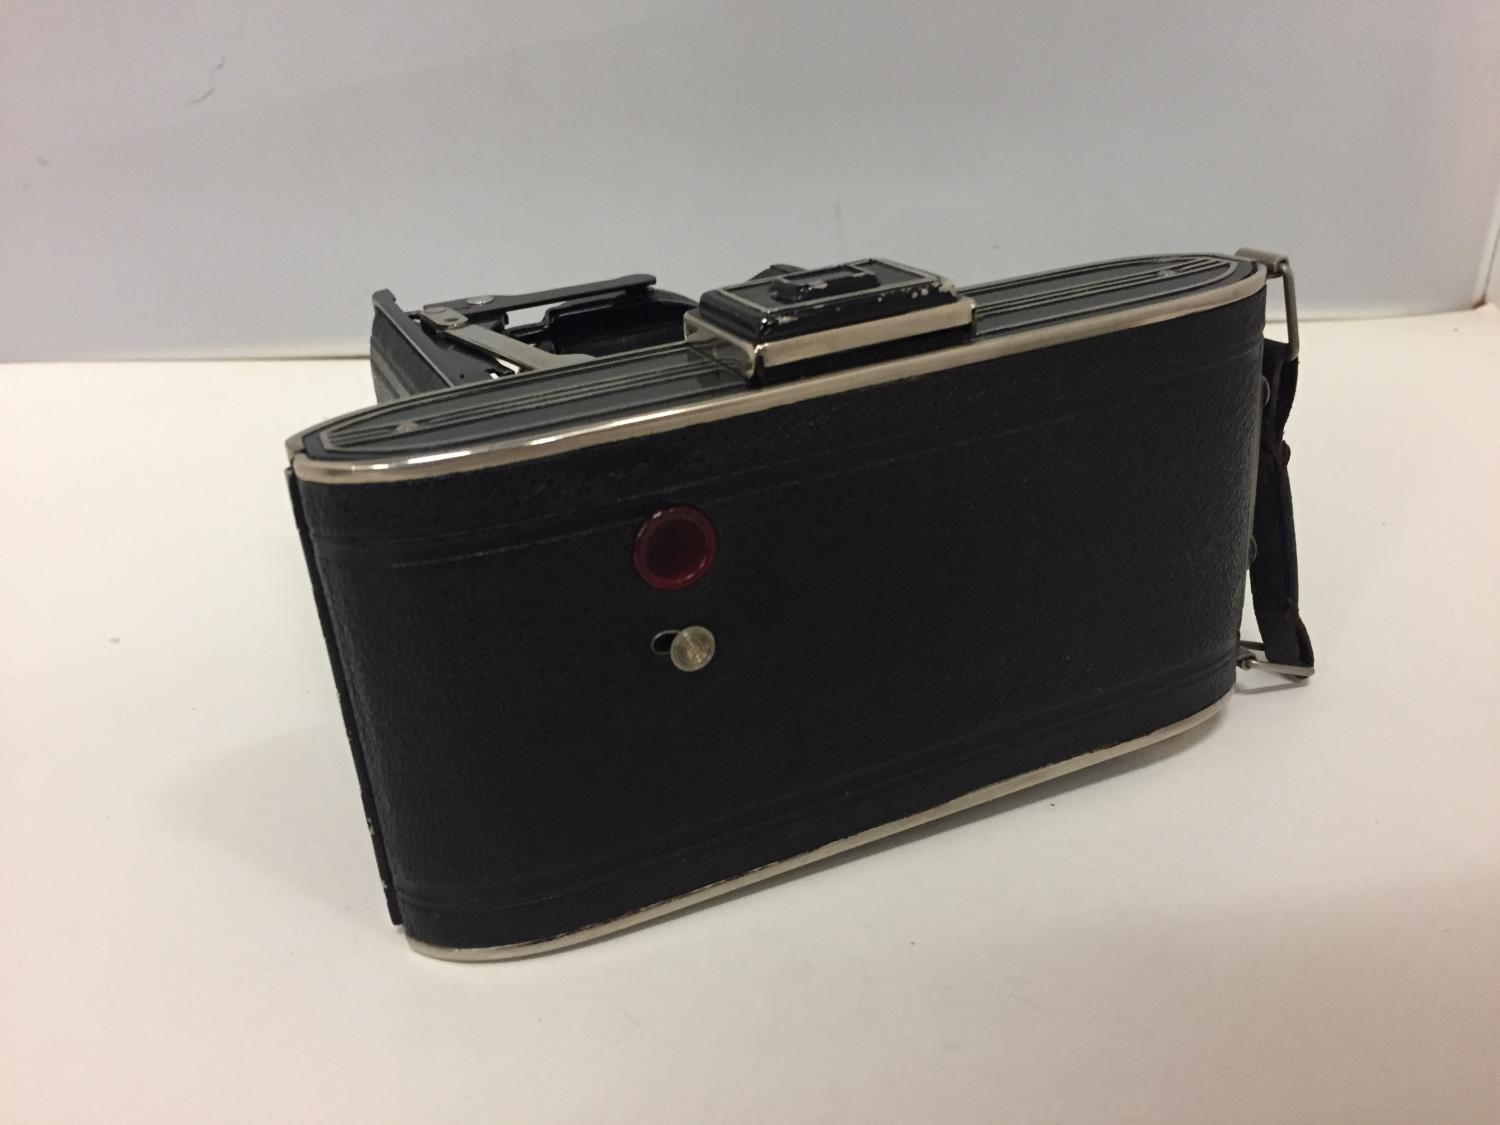 A VINTAGE CAMERA AND CASE - Image 7 of 8